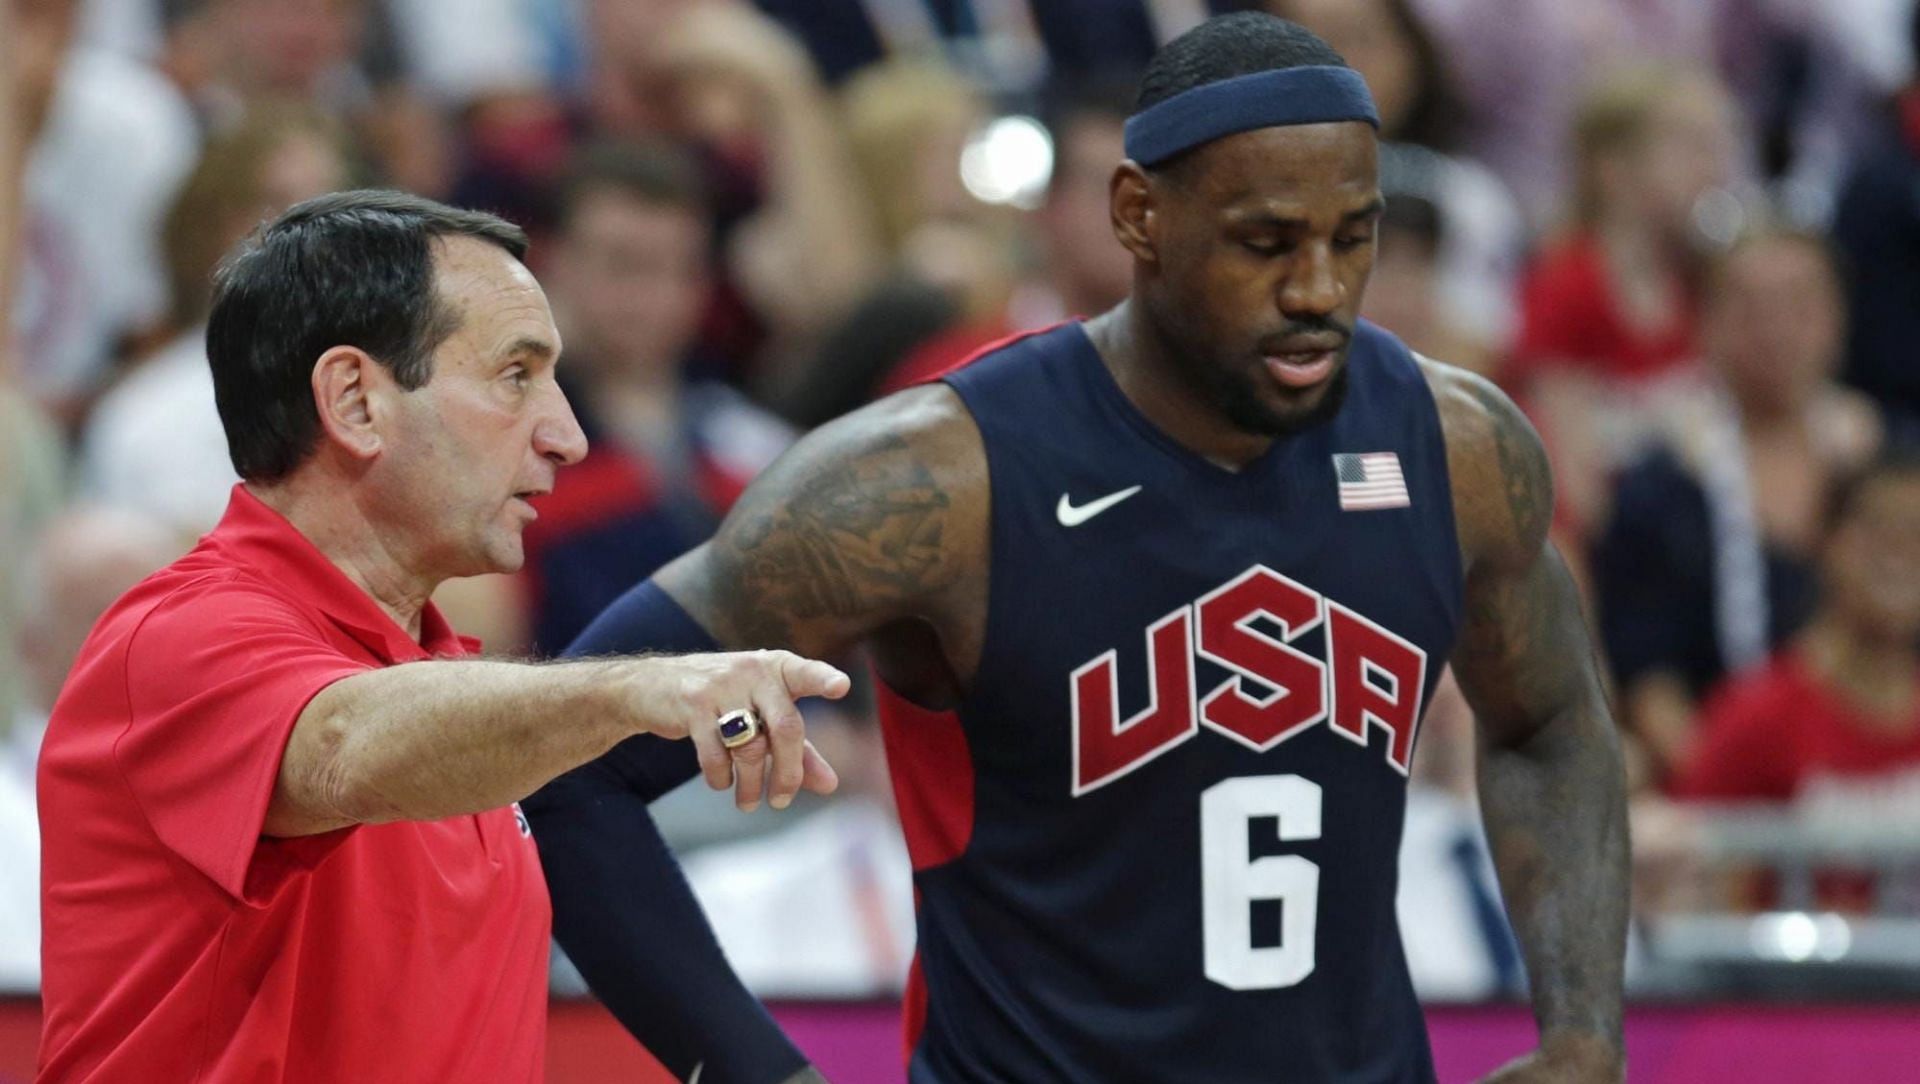 “Yo, Coach, you’d better fix that mother*****r“ – Ian O’Connor on LeBron James’ conversation with Mike Krzyzewski regarding Kobe Bryant’s selfishness at the 2008 Beijing Olympics